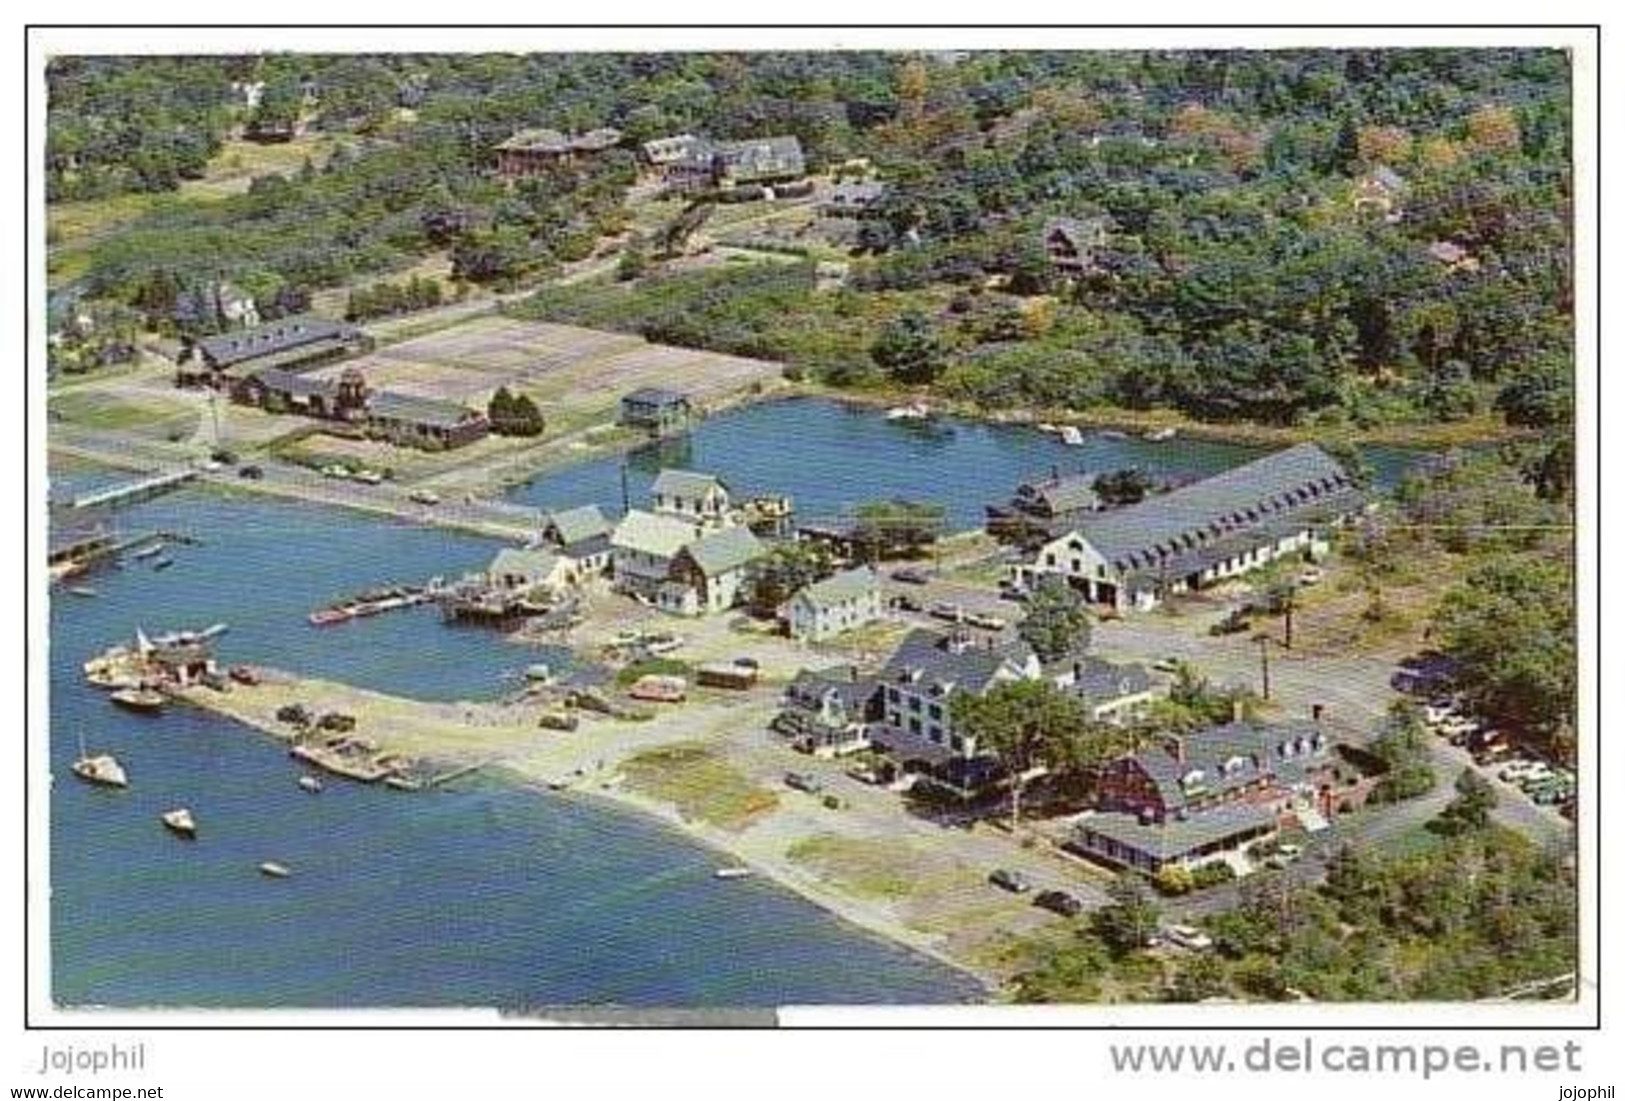 The Kennebunk River Club - With The Arundel Hotel In The Foreground - Kennebunkport - 1978 - Kennebunkport